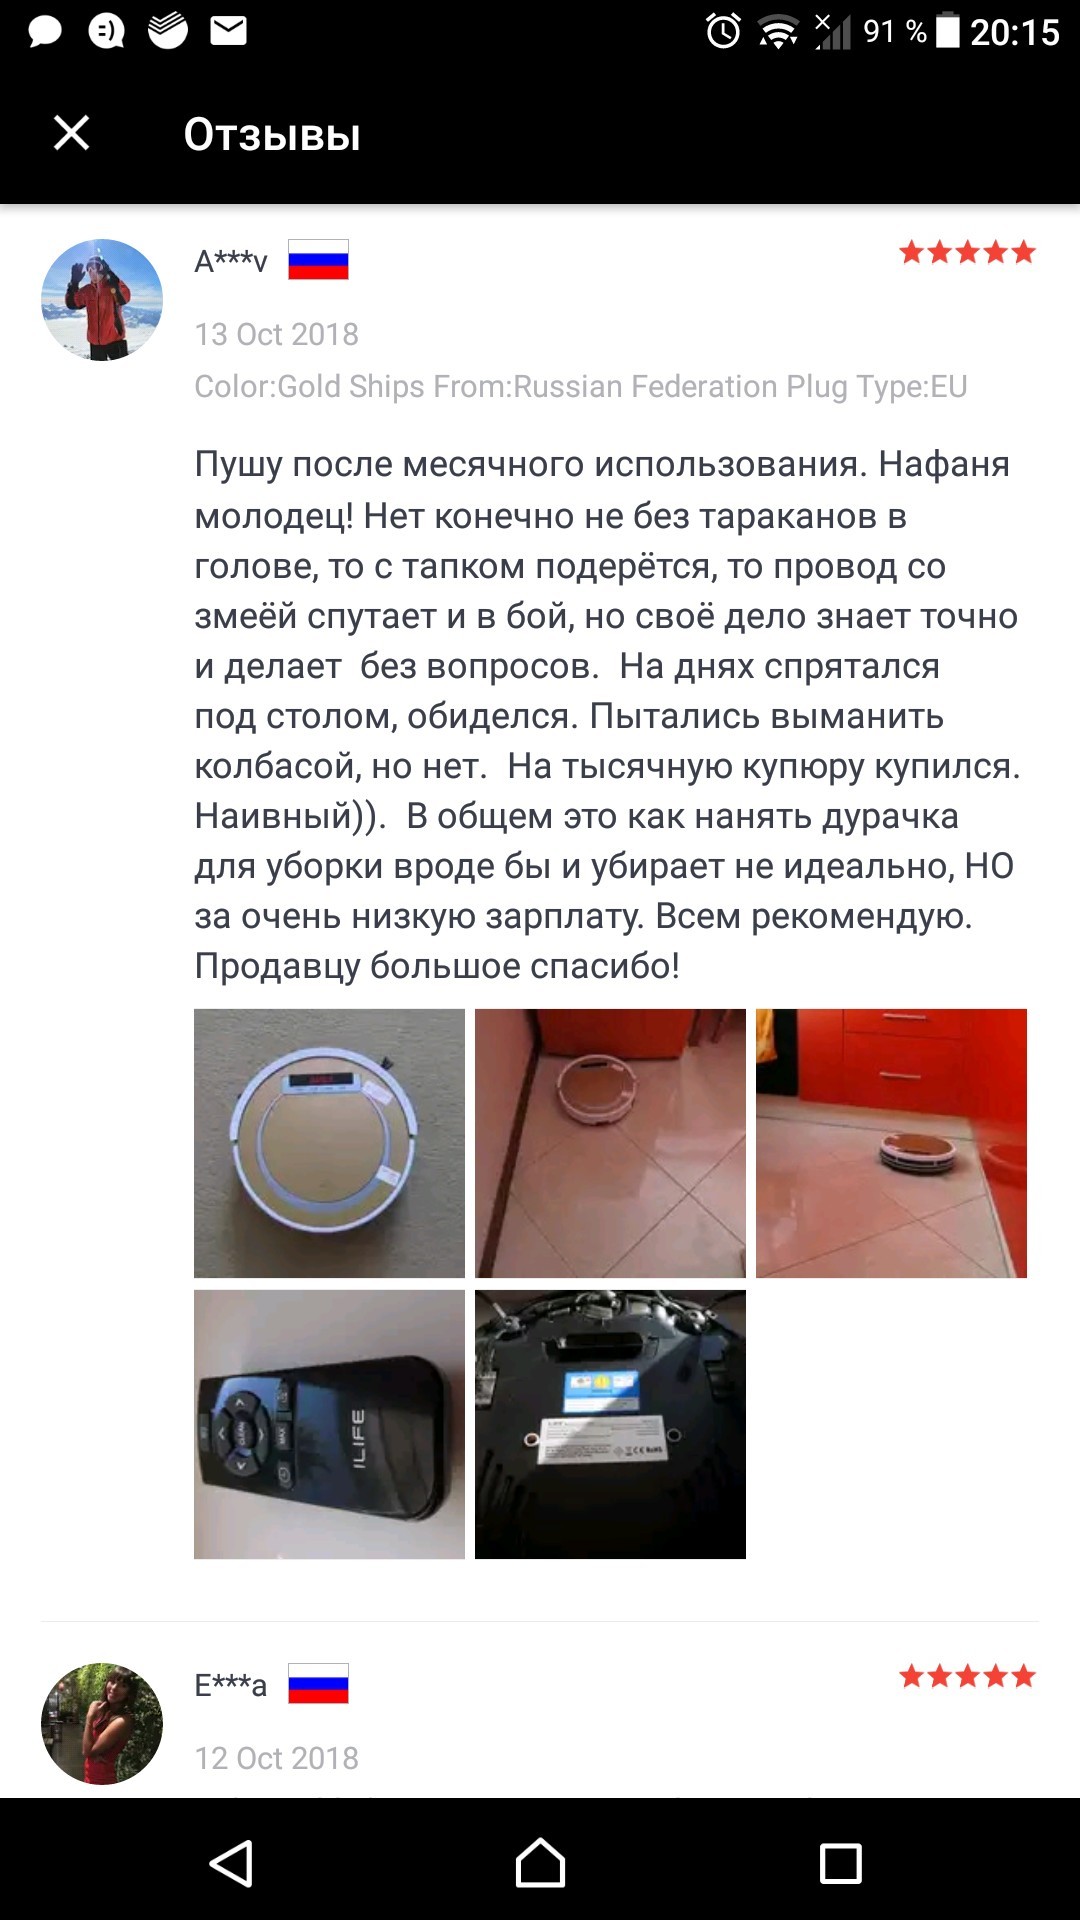 Review on Ali - AliExpress, Review, Robot Vacuum Cleaner